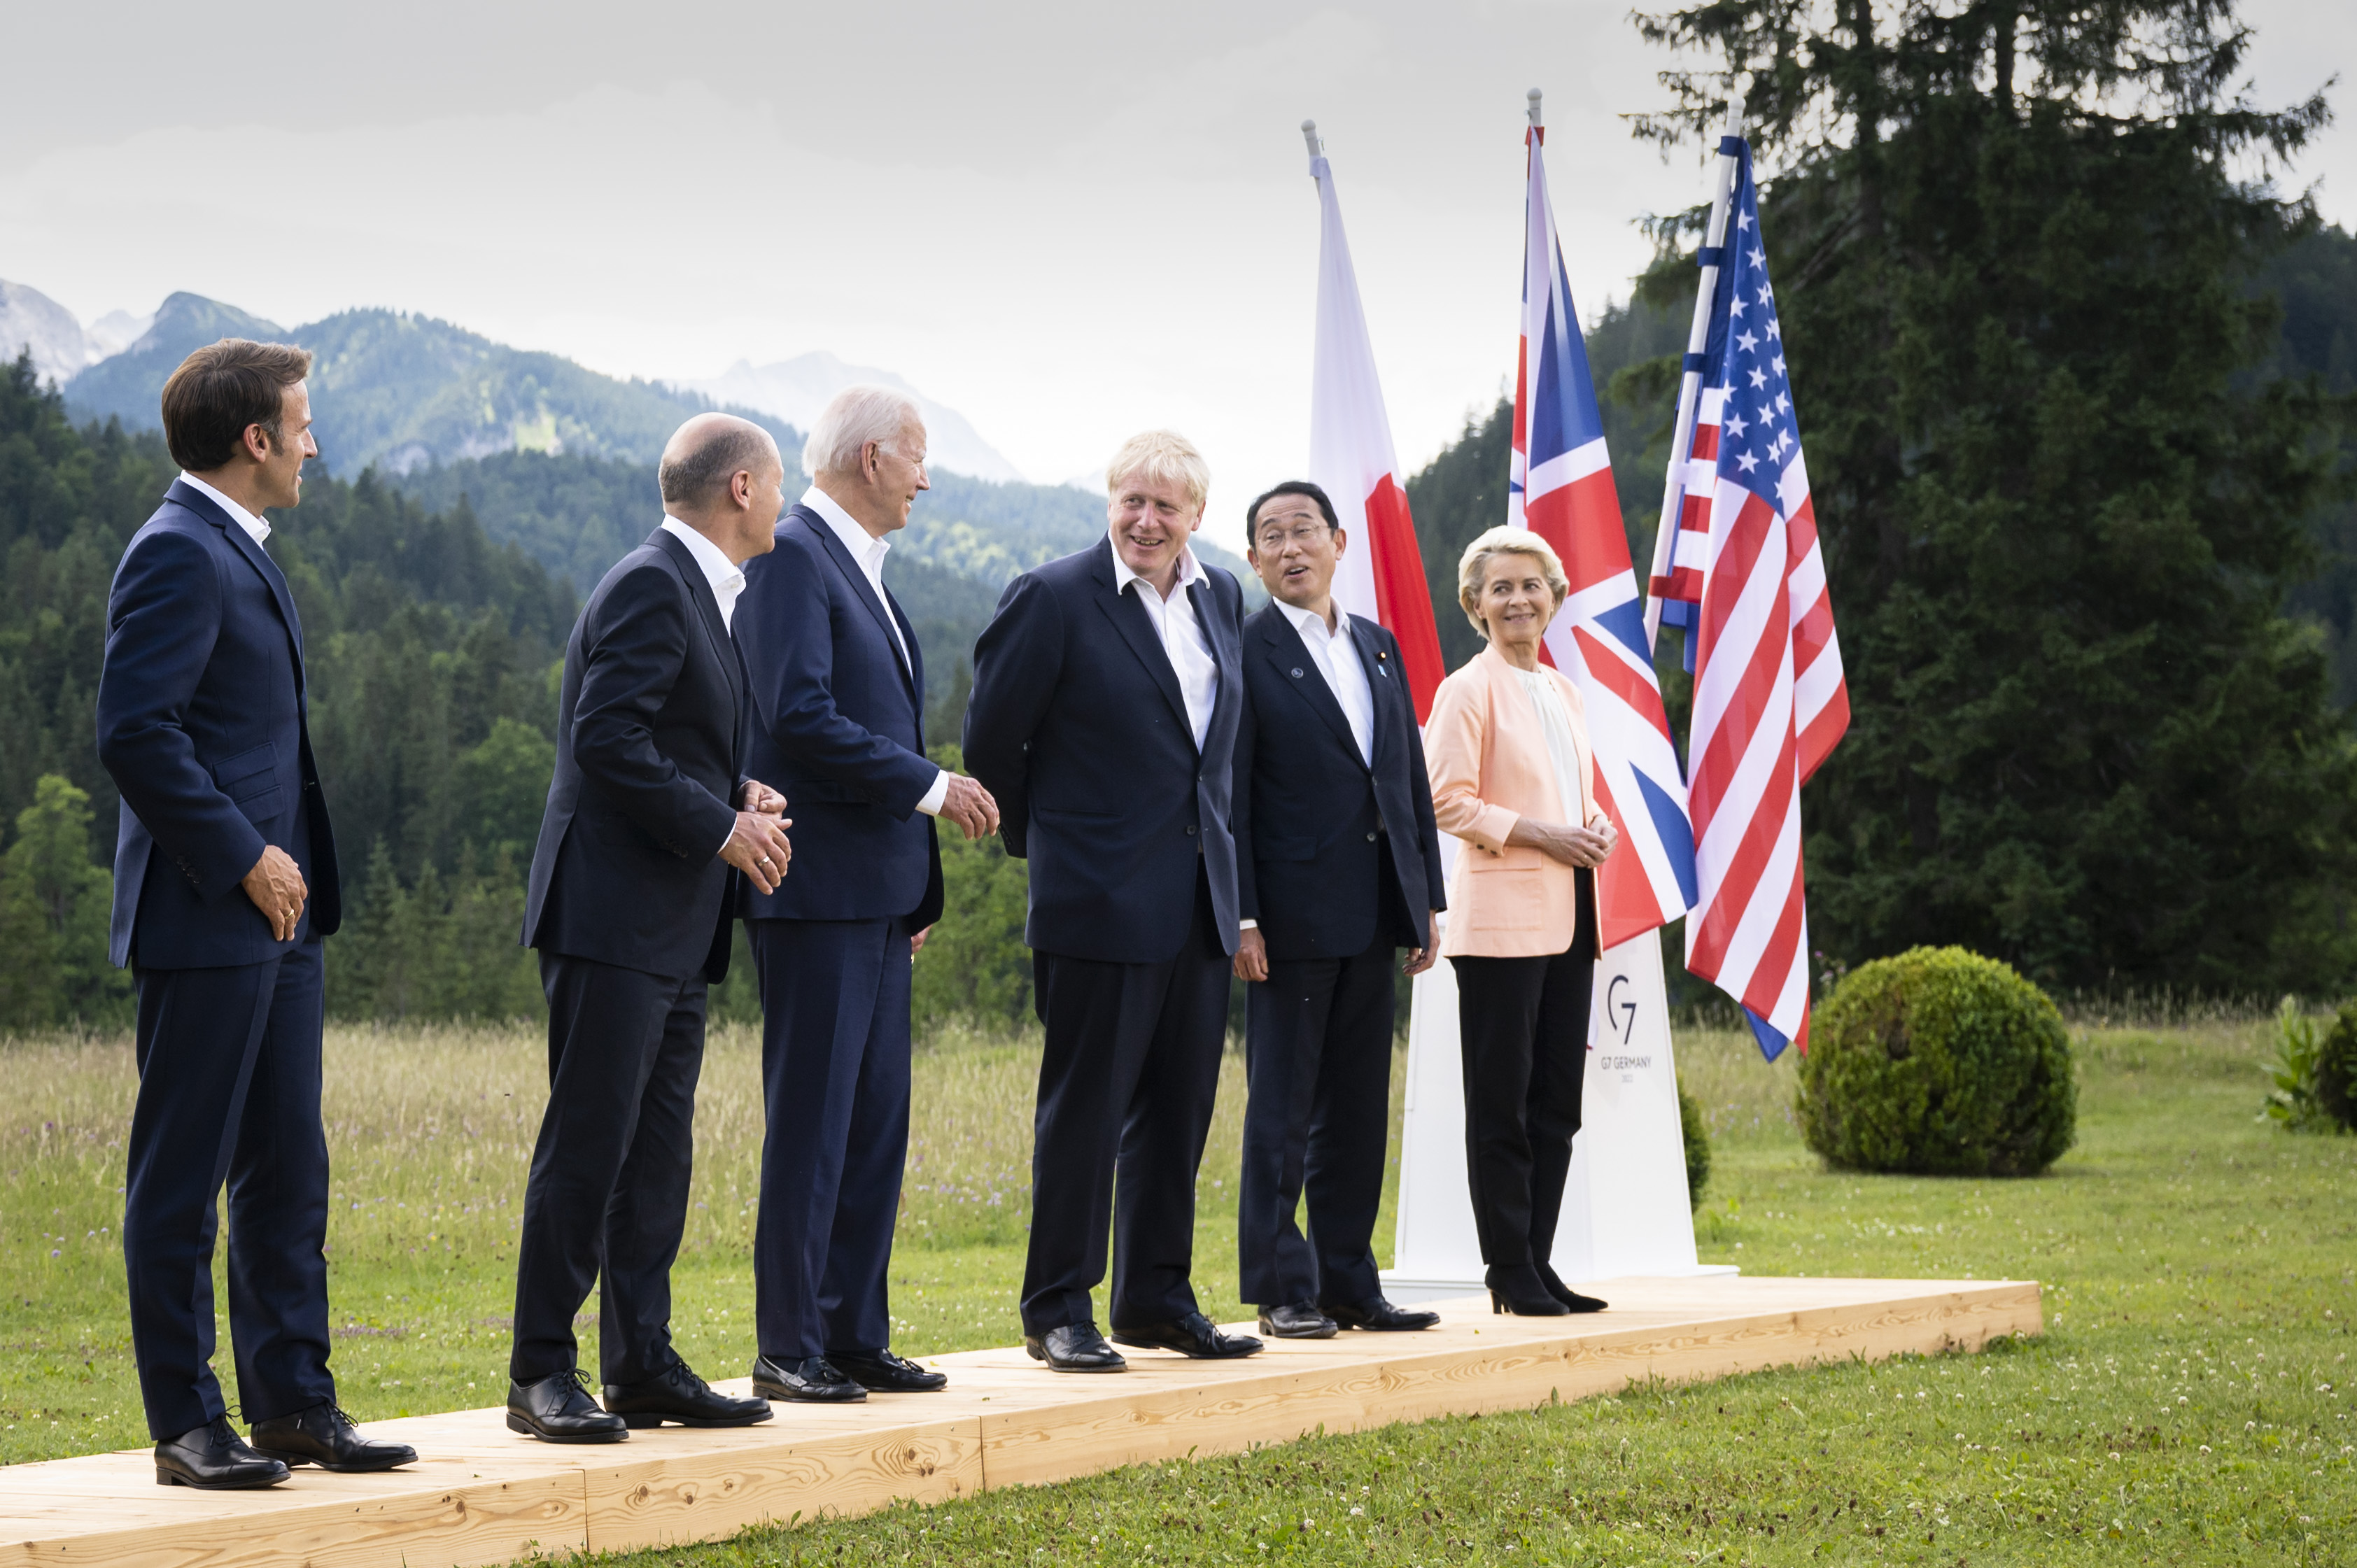 G7 participants wait for the family photo to be taken.